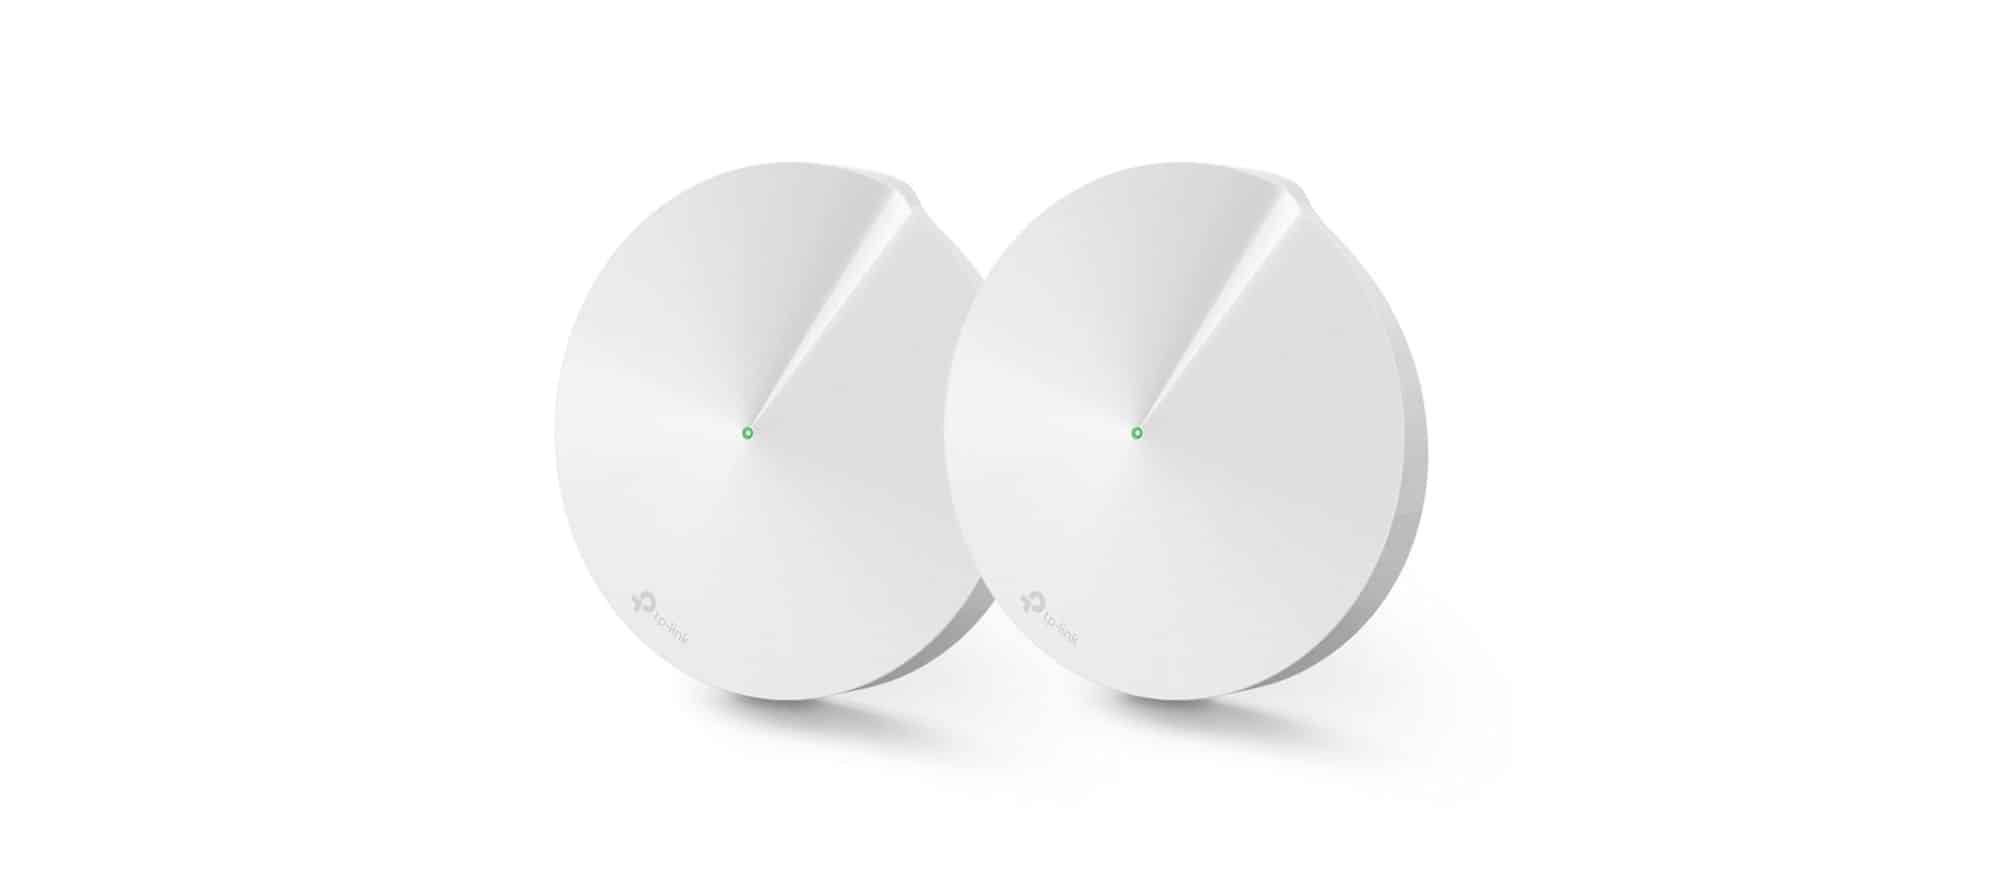 5 Best WiFi Mesh Network Routers for Your Home and Office